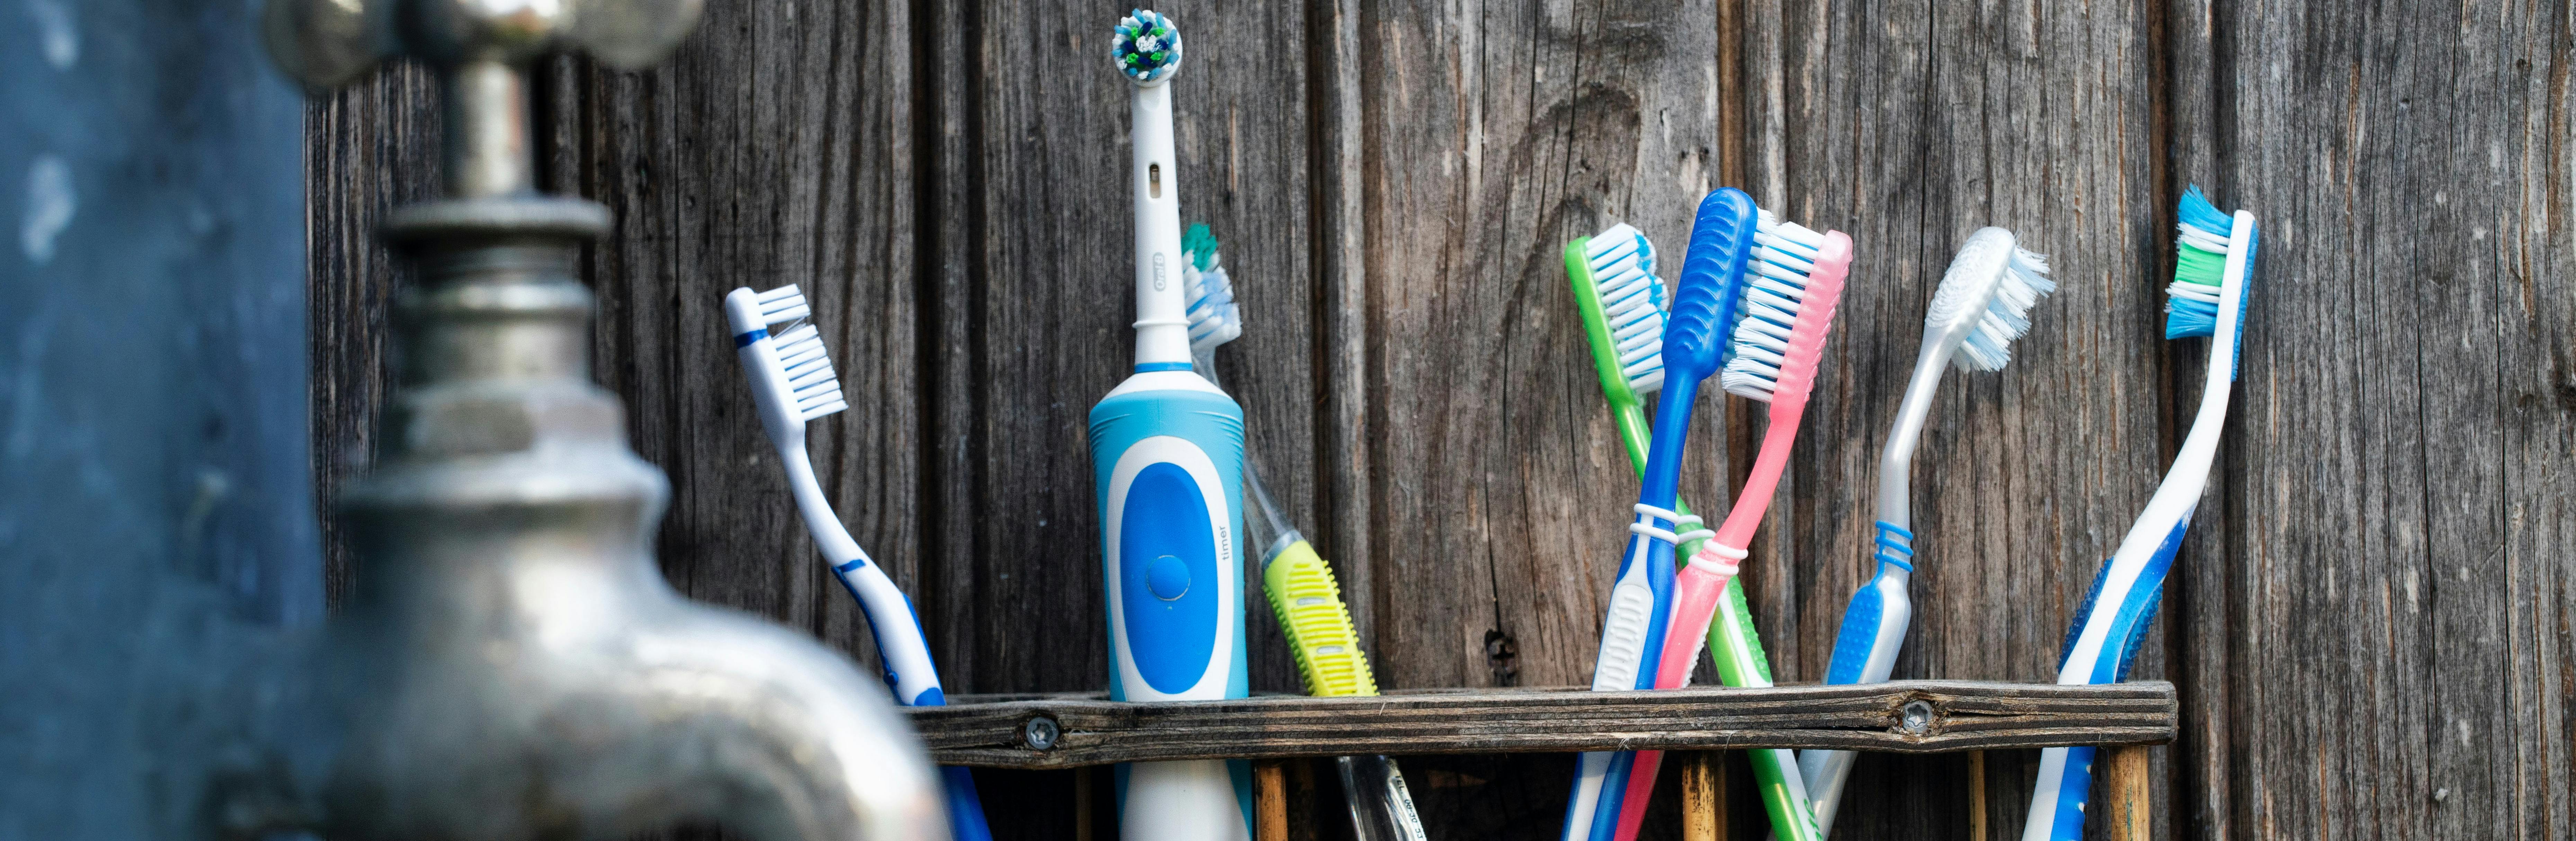 Tap and toothbrushes on a shelf